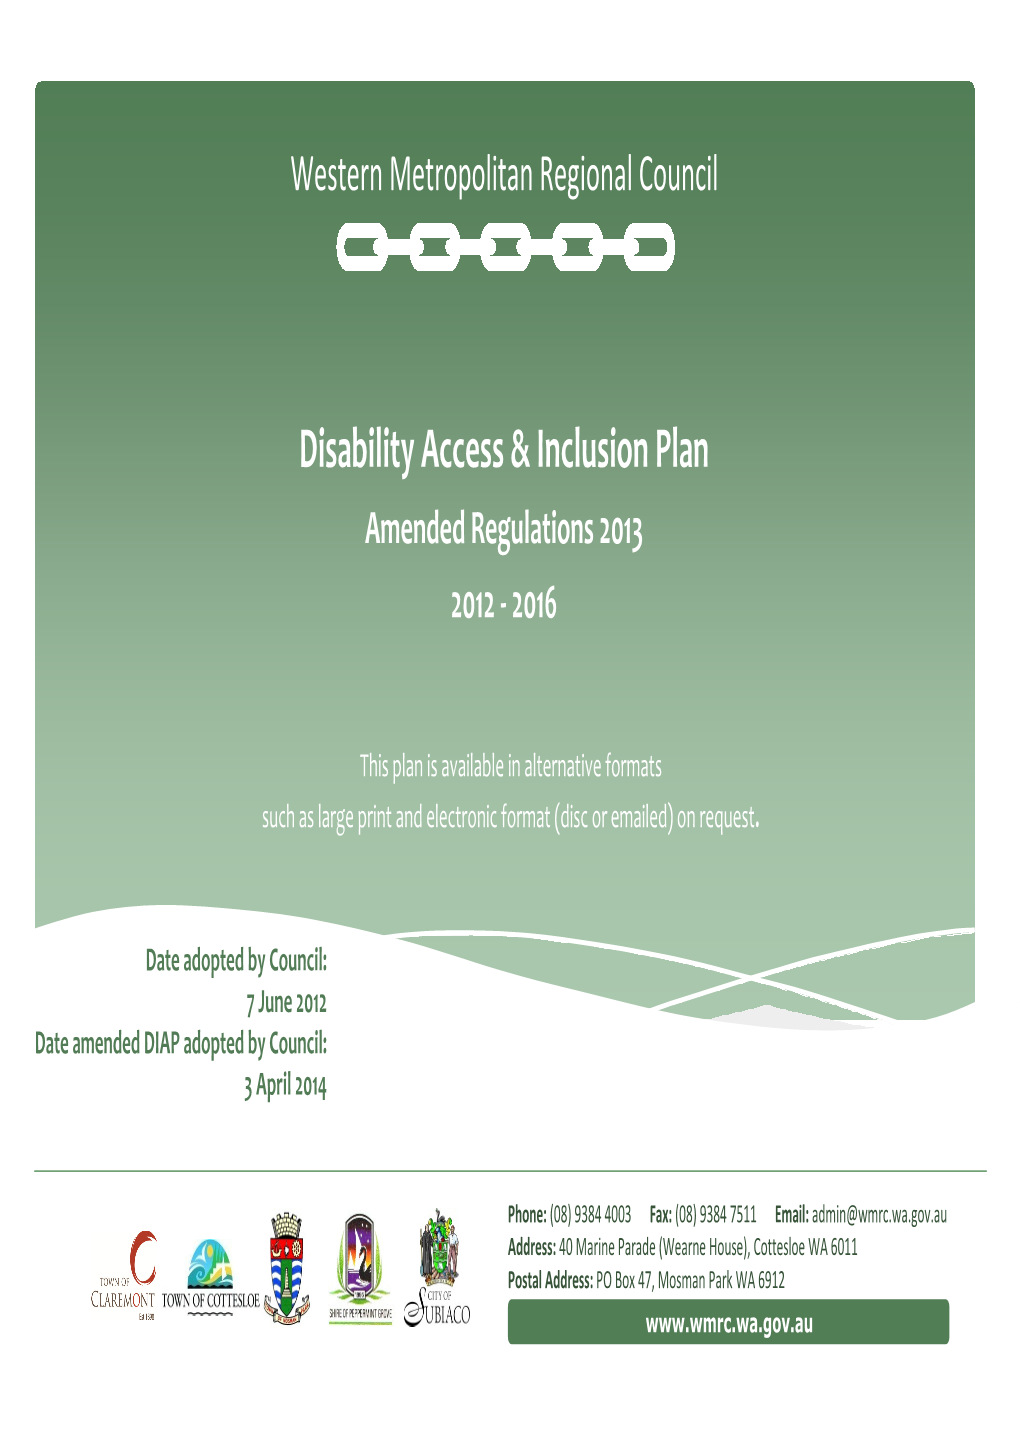 Disability Access & Inclusion Plan